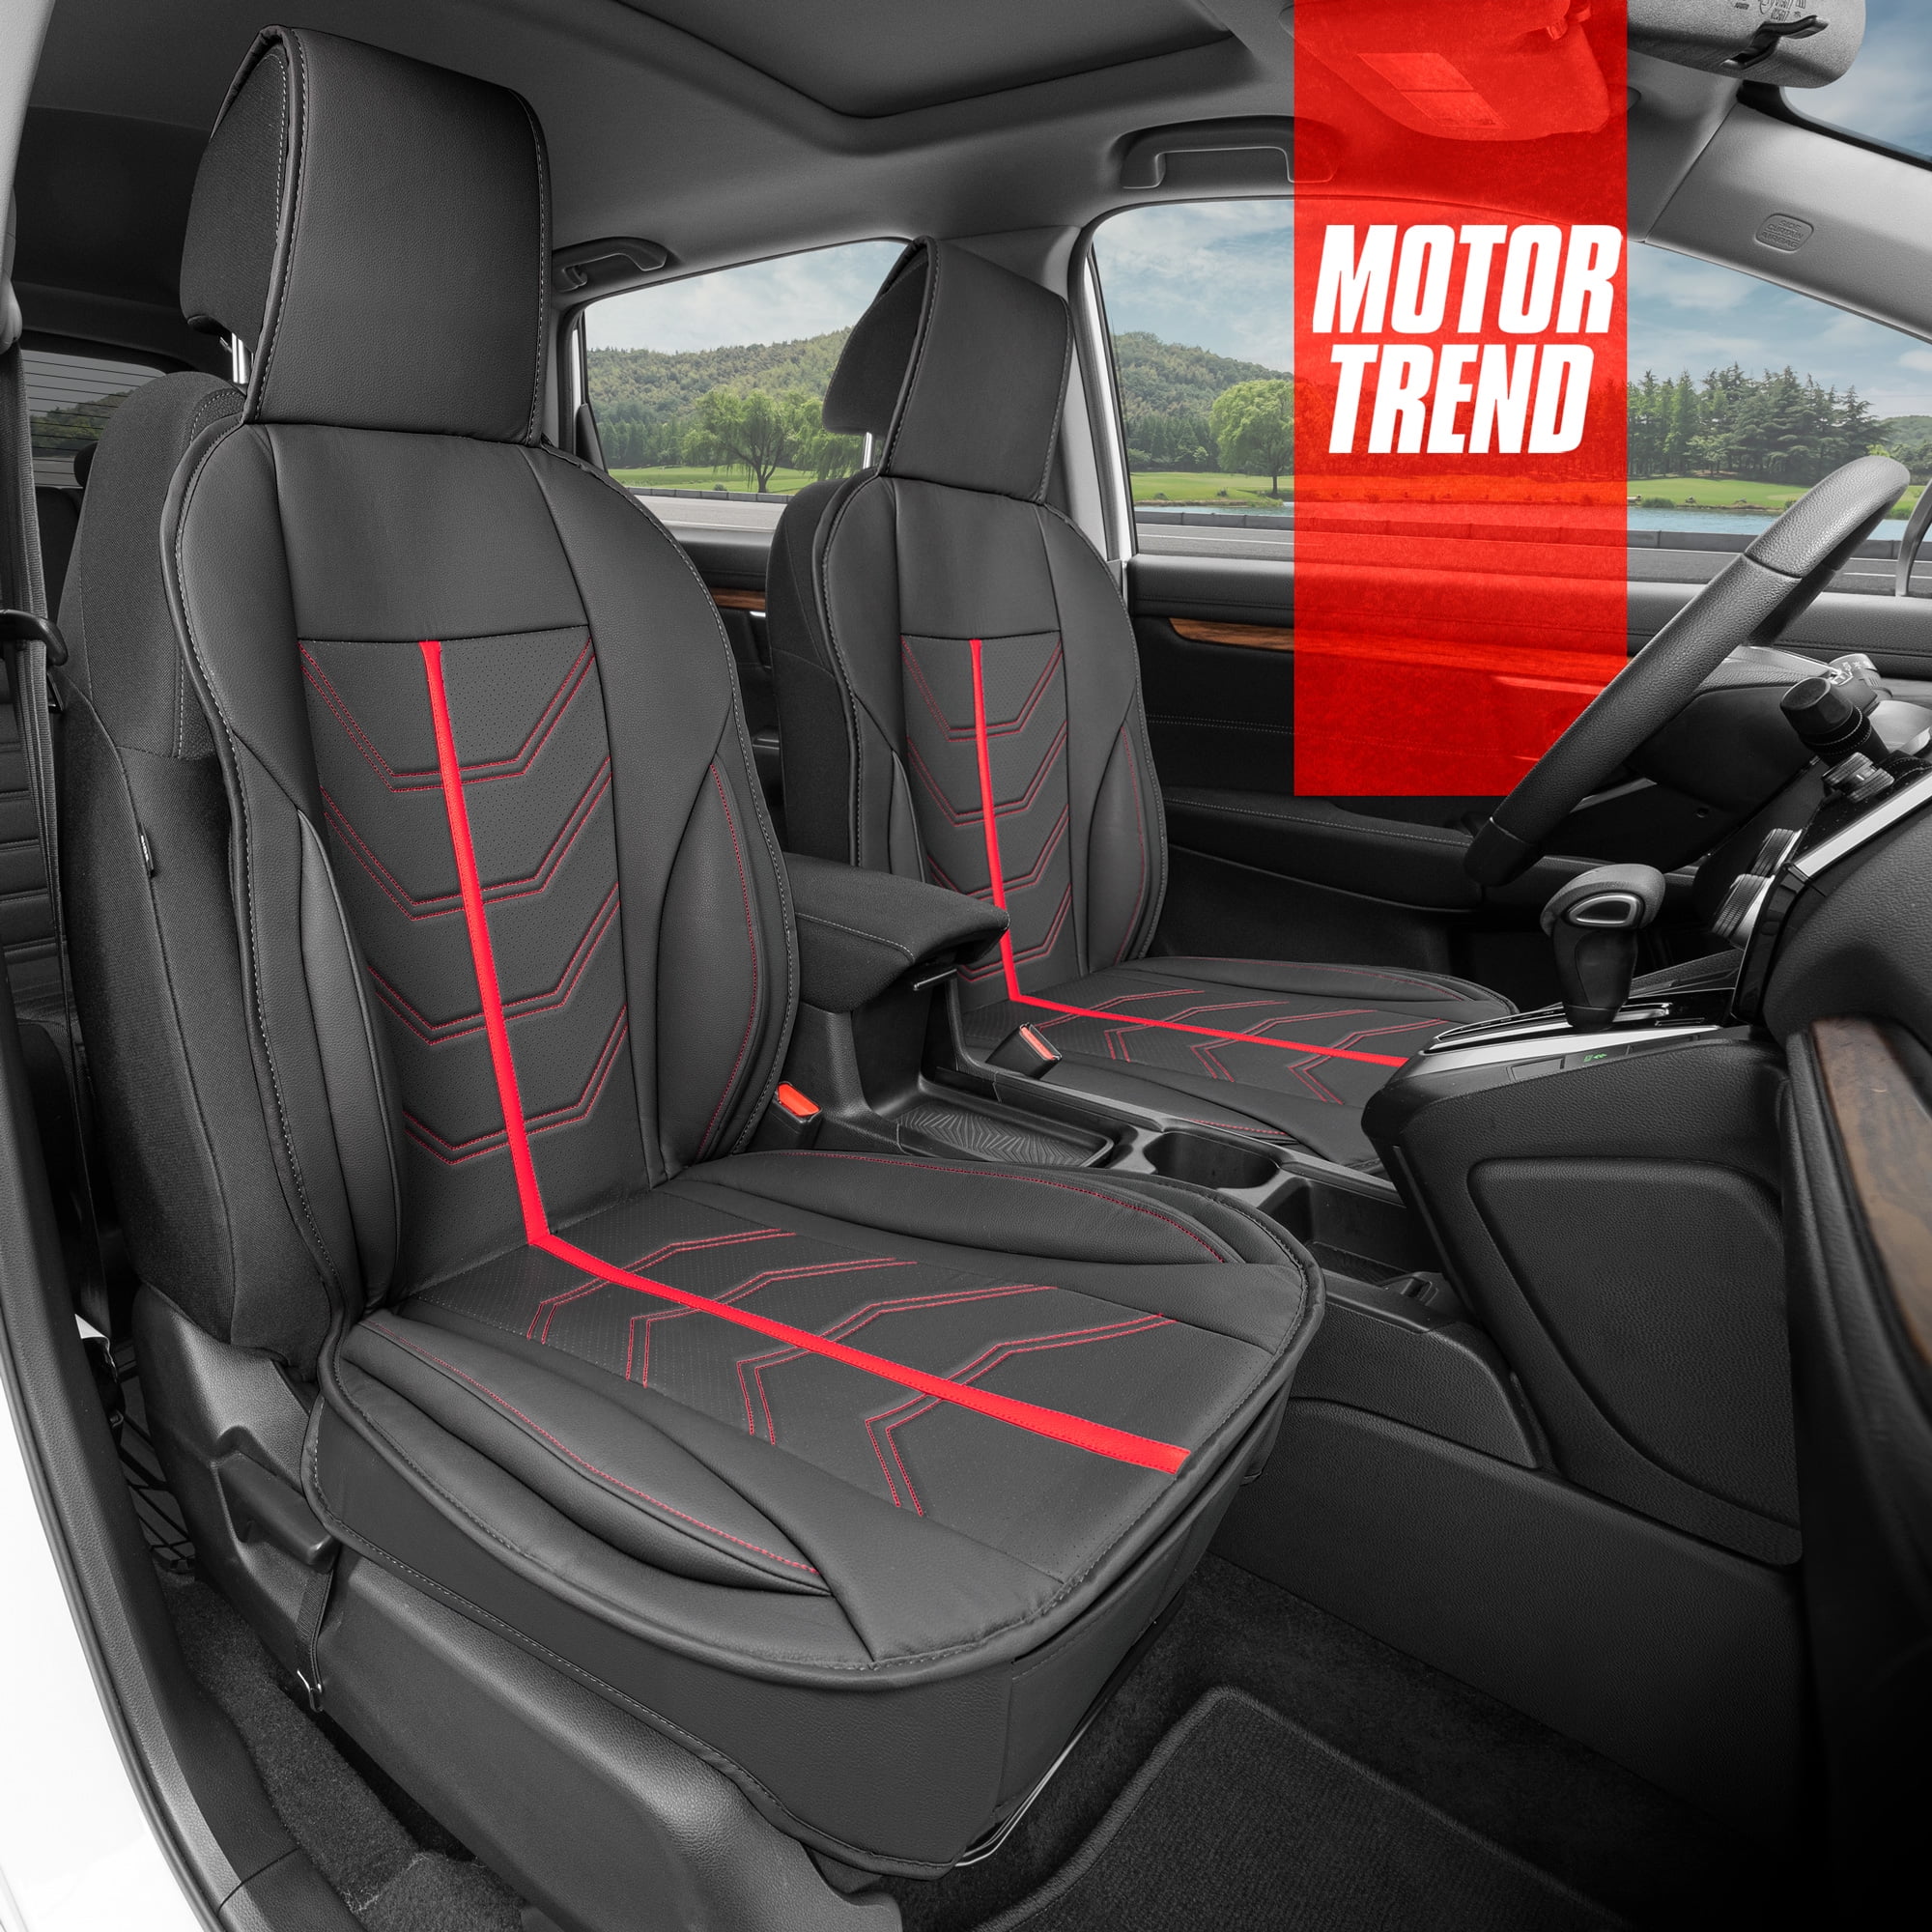 Motor Trend Seat Covers for Cars Trucks SUV, Faux Leather 2-Pack